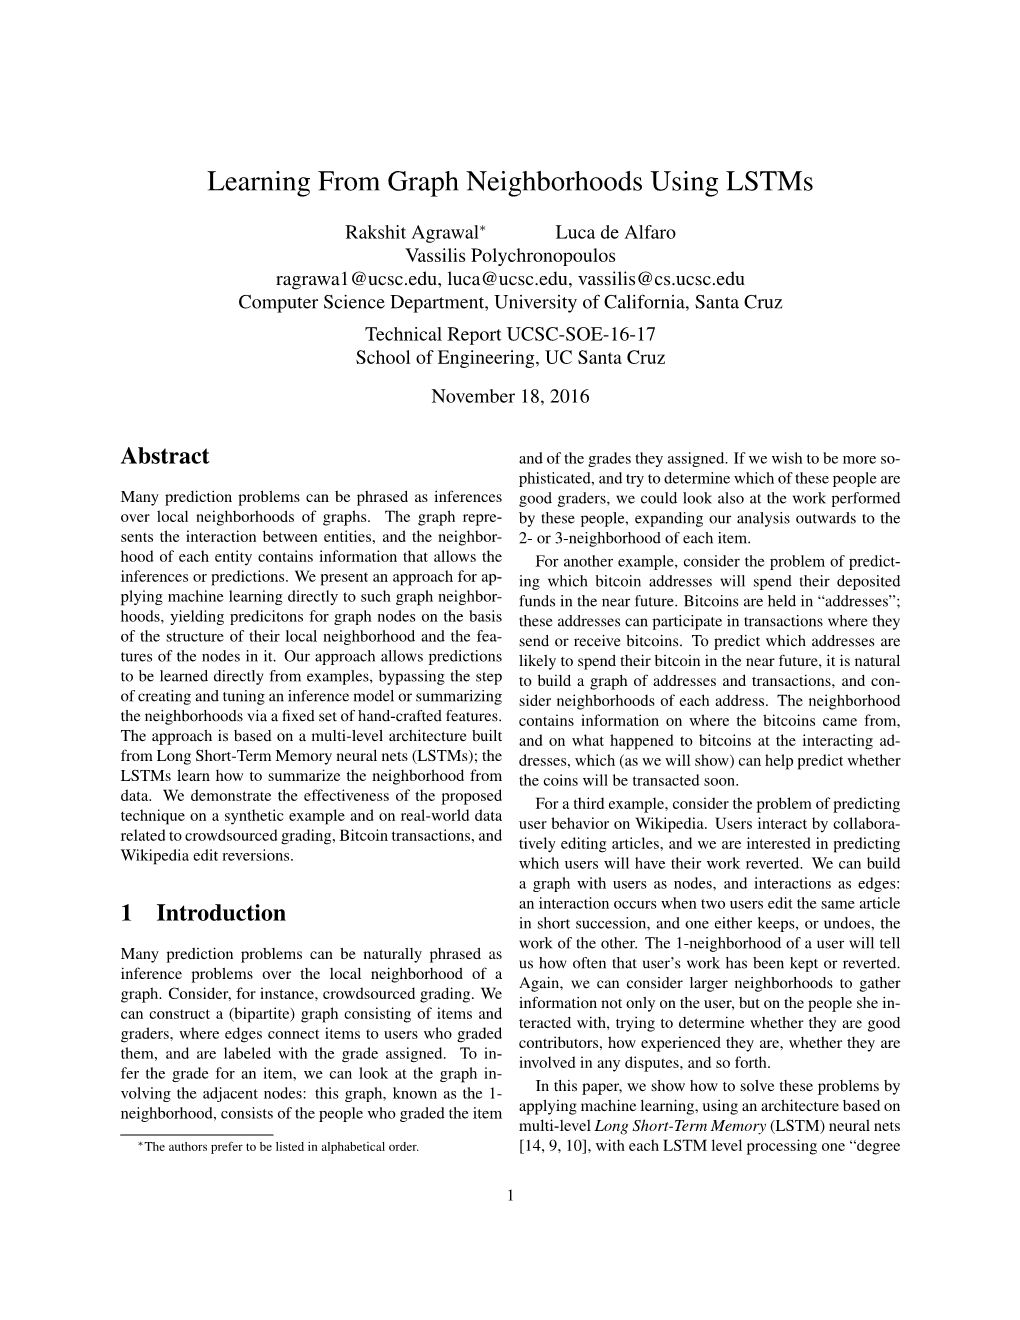 Learning from Graph Neighborhoods Using Lstms